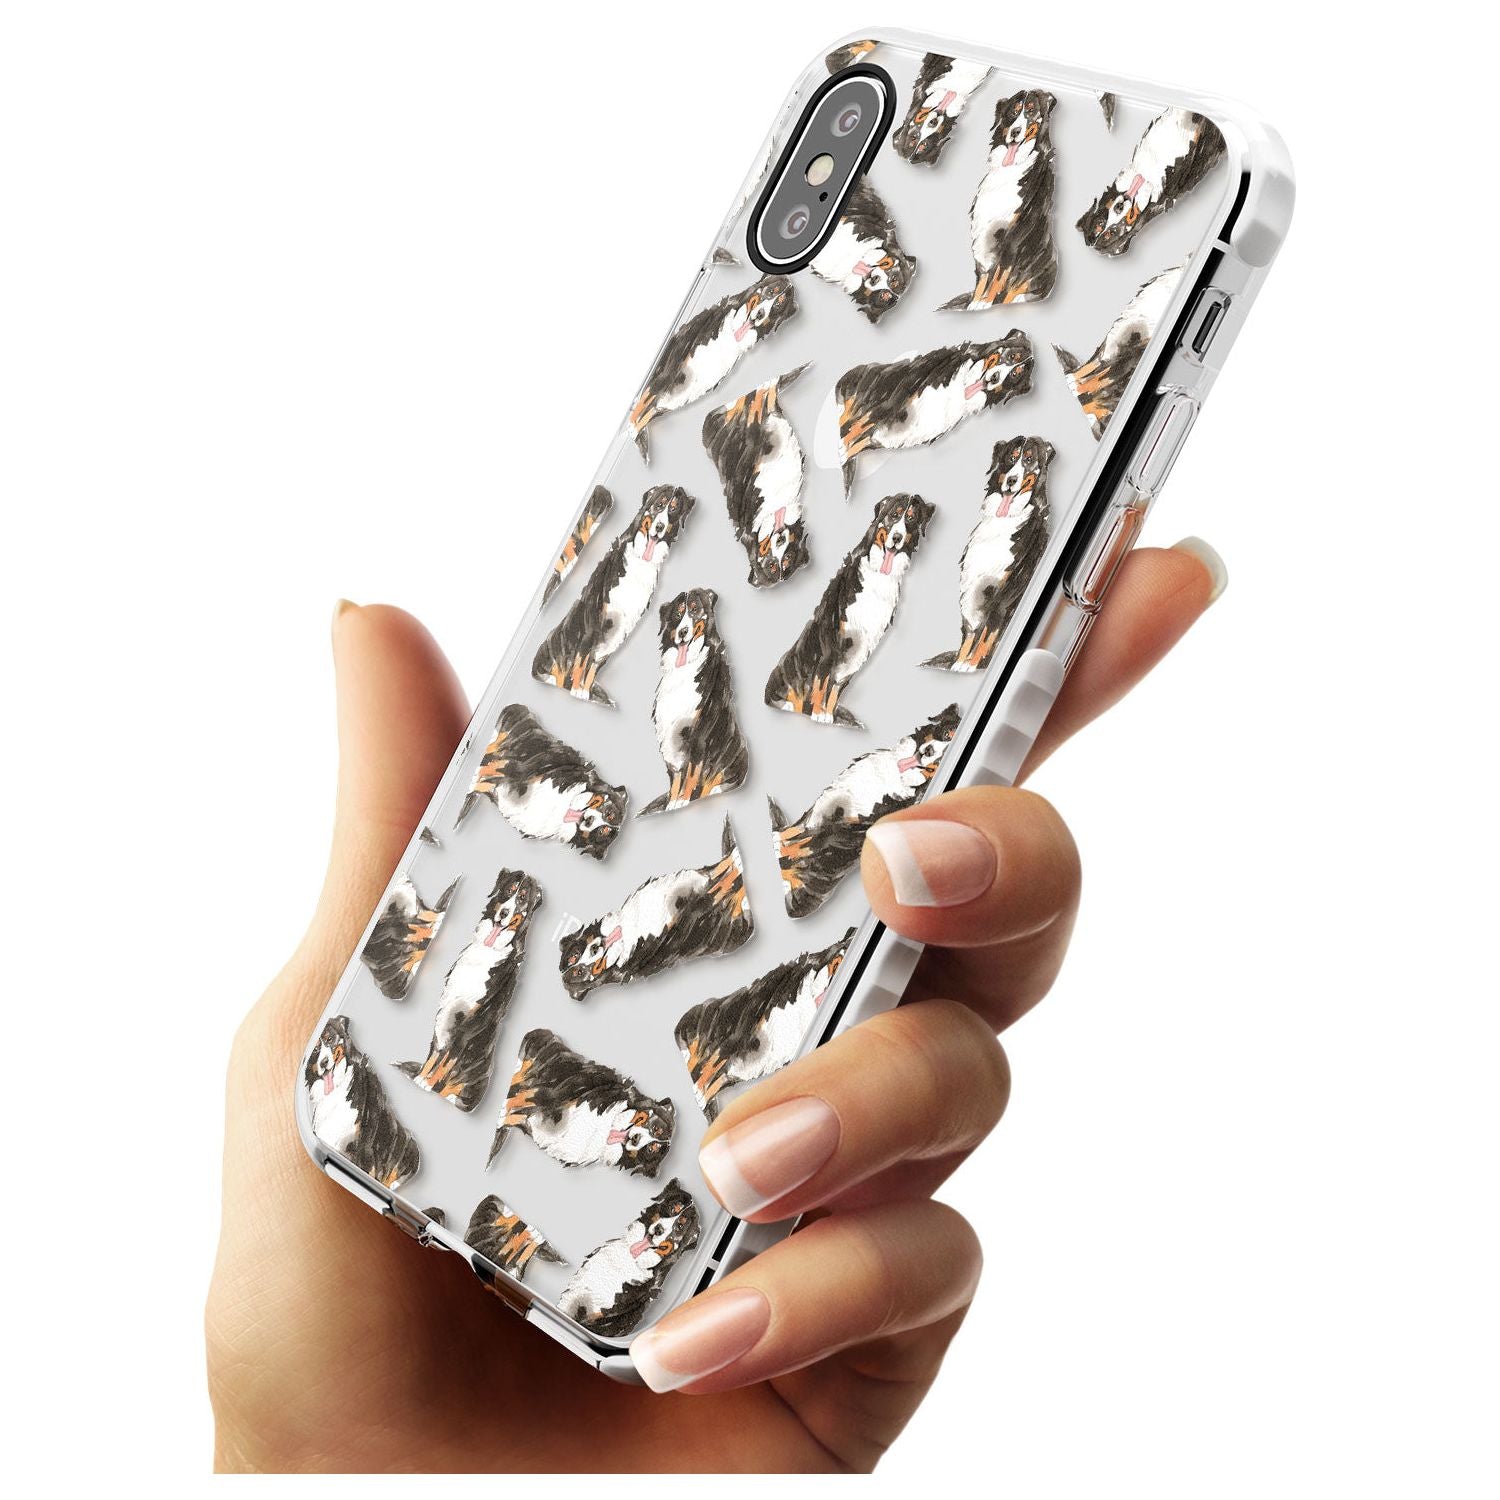 Bernese Mountain Dog Watercolour Dog Pattern Impact Phone Case for iPhone X XS Max XR